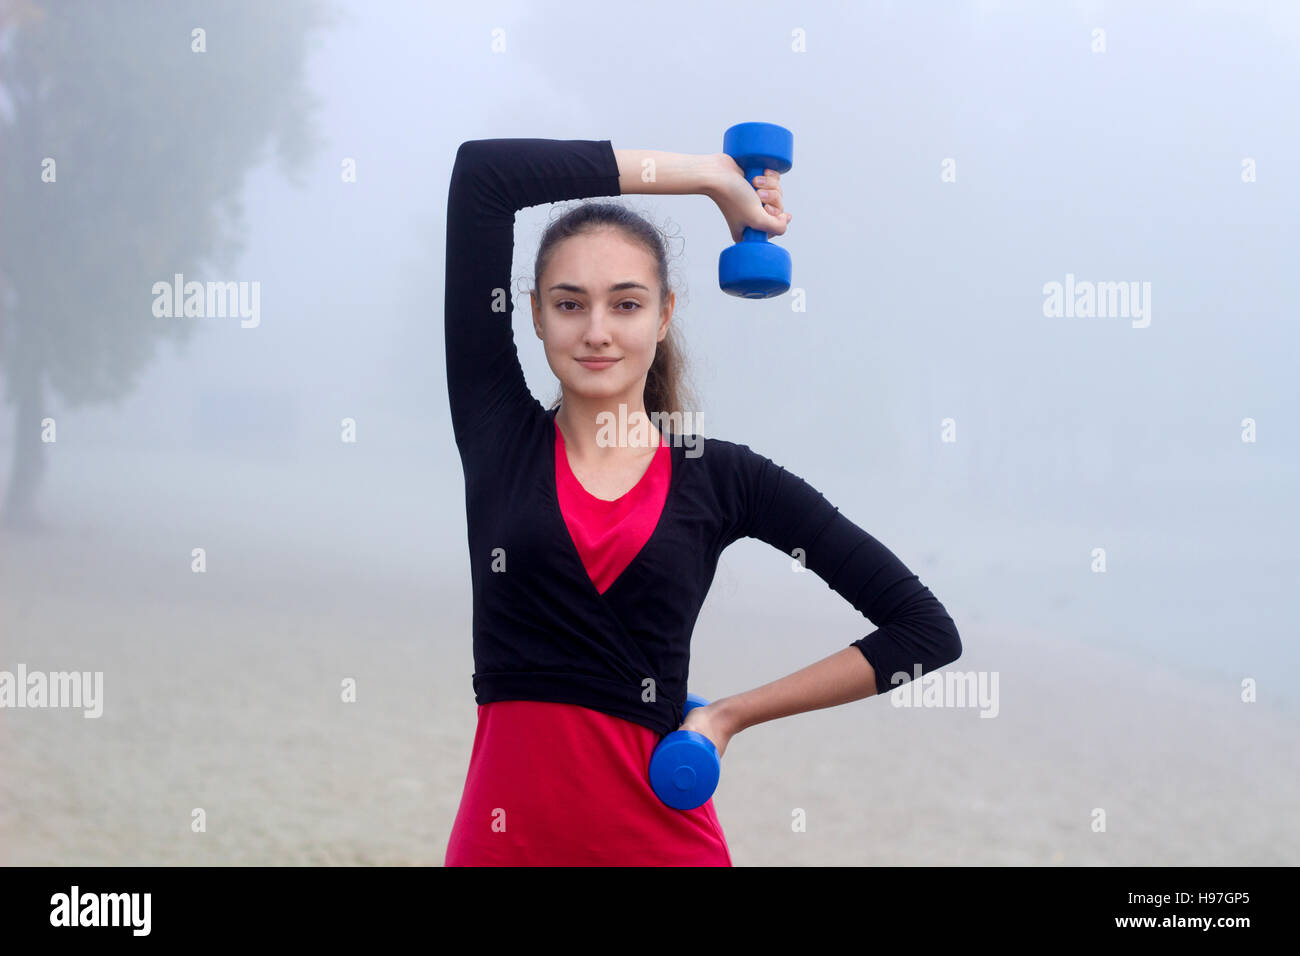 Young pretty slim fitness sporty woman exercises with weights dumbells during training workout outdoor Stock Photo